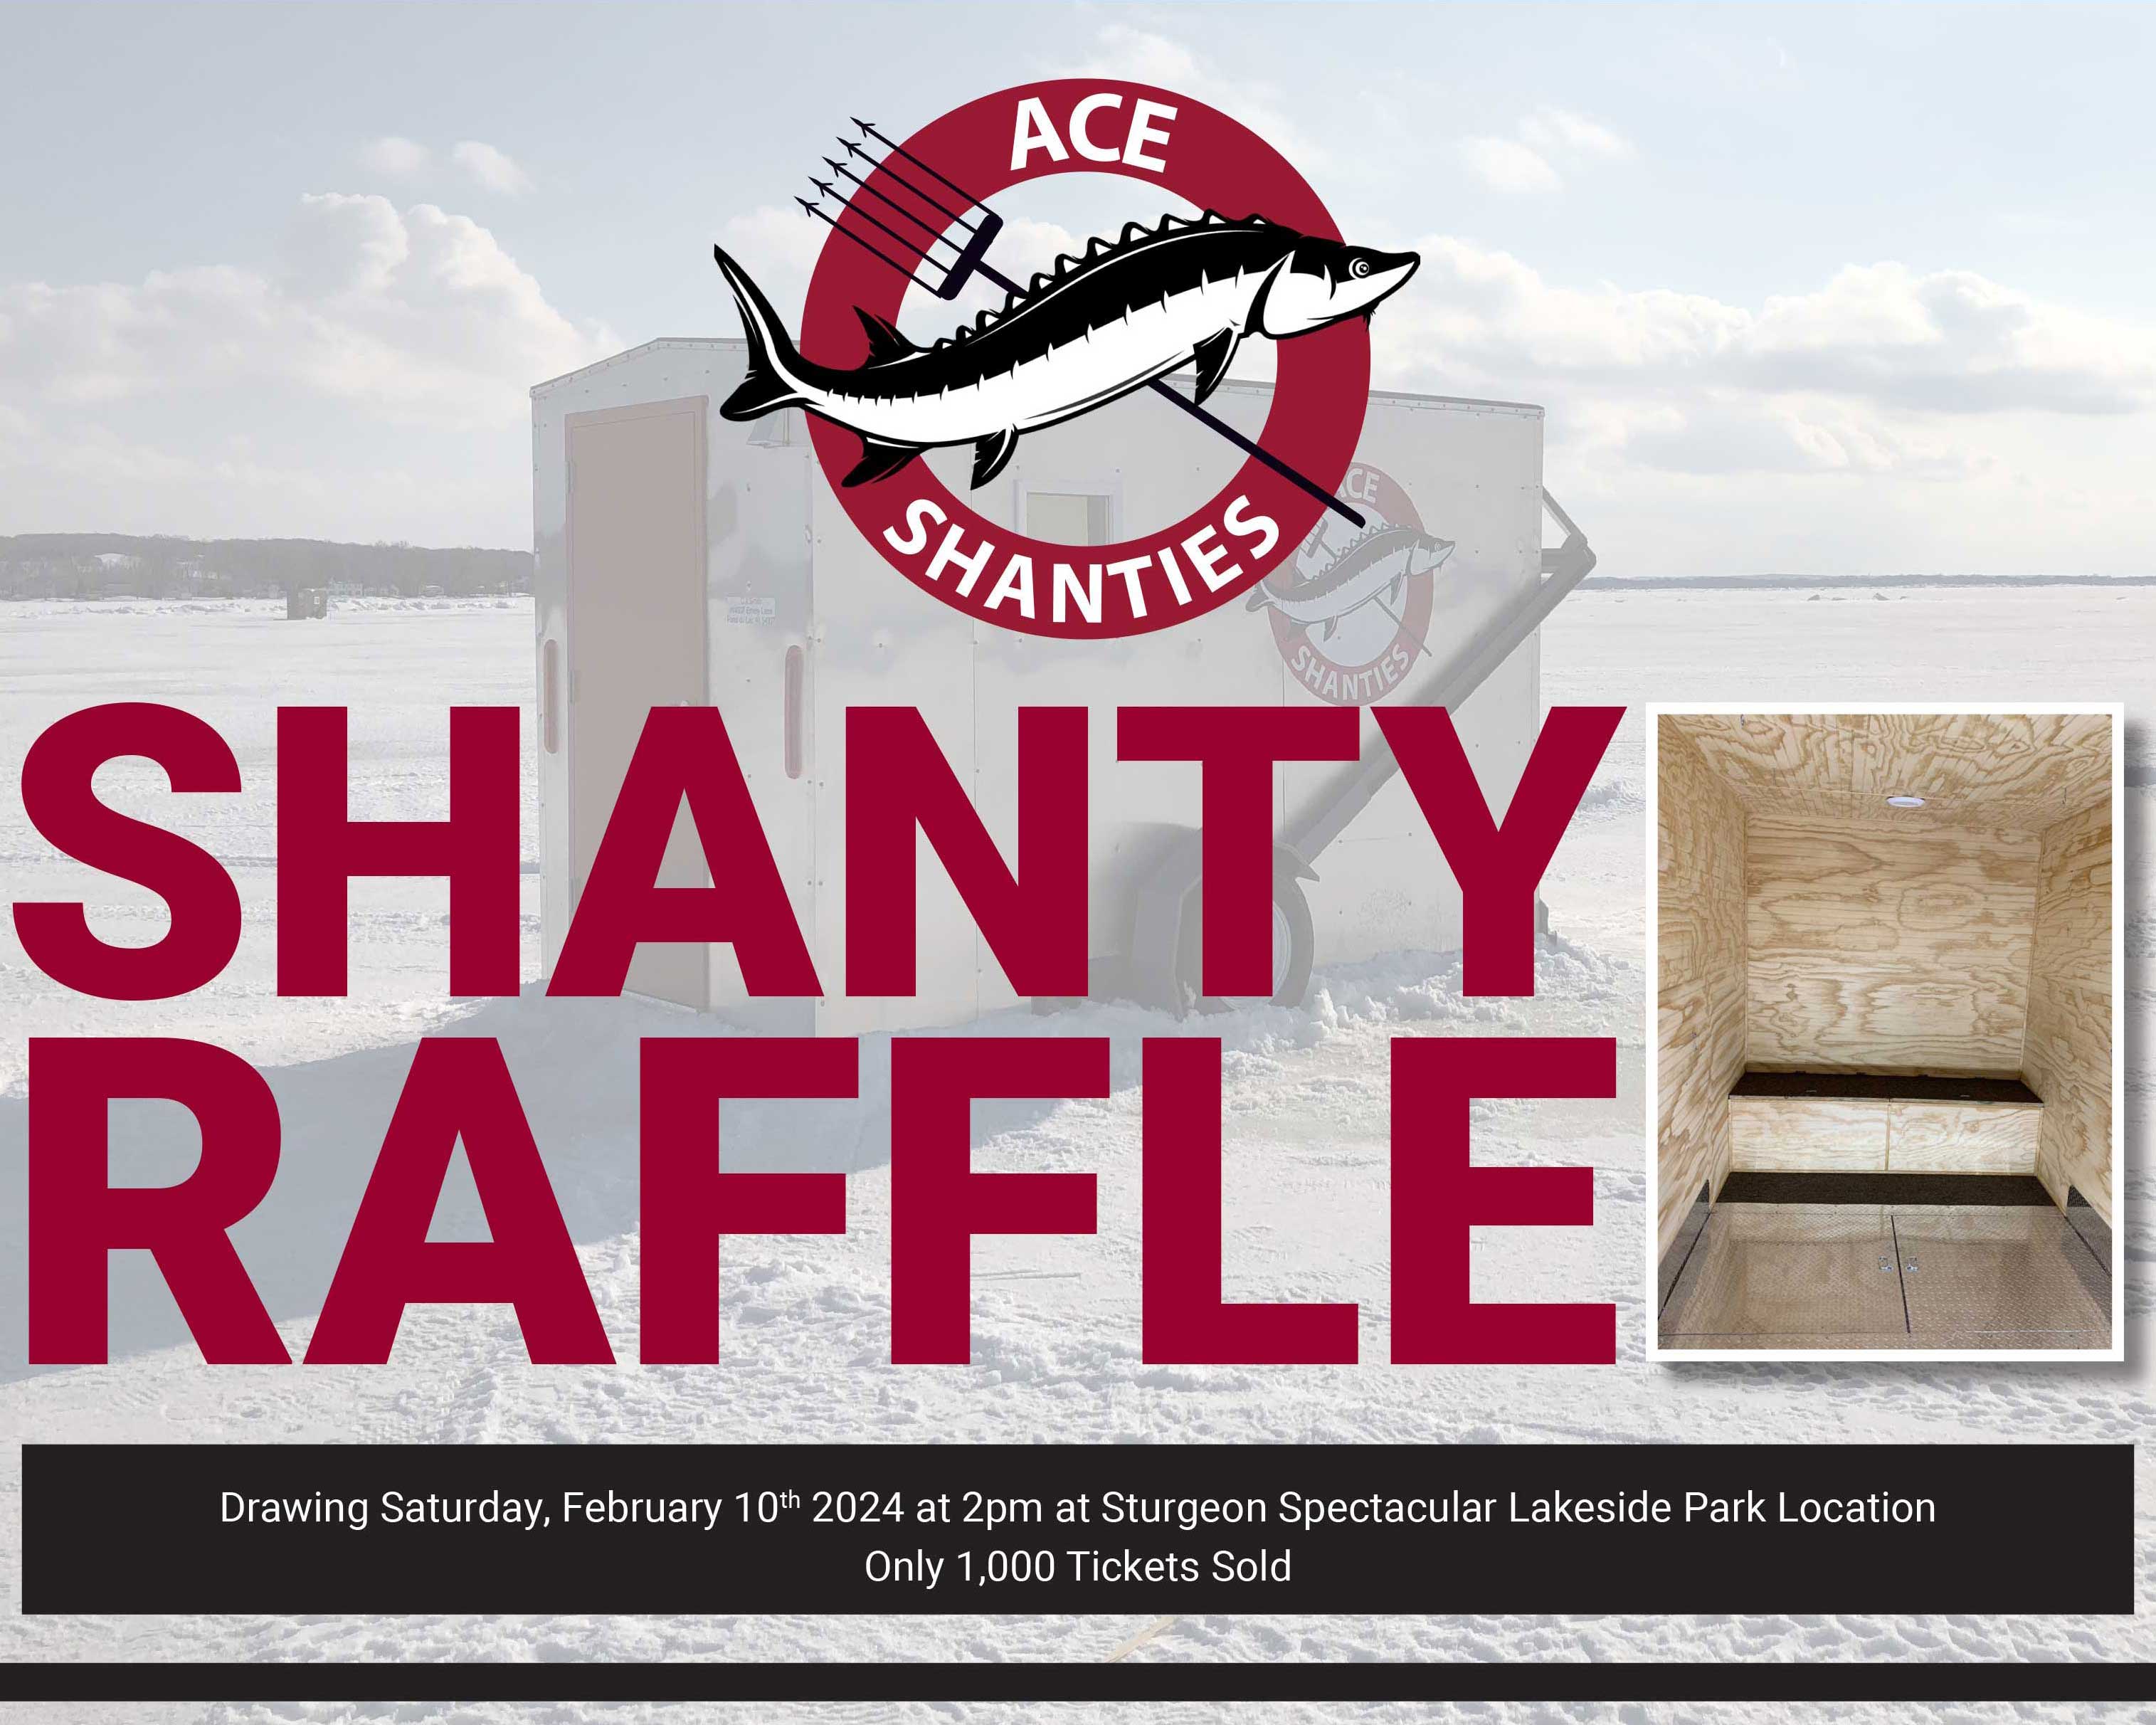 C.D. Smith Construction Building School Partnerships with ACE Shanty Raffle Poster for Construction and Skilled Trades Career and Technical Education